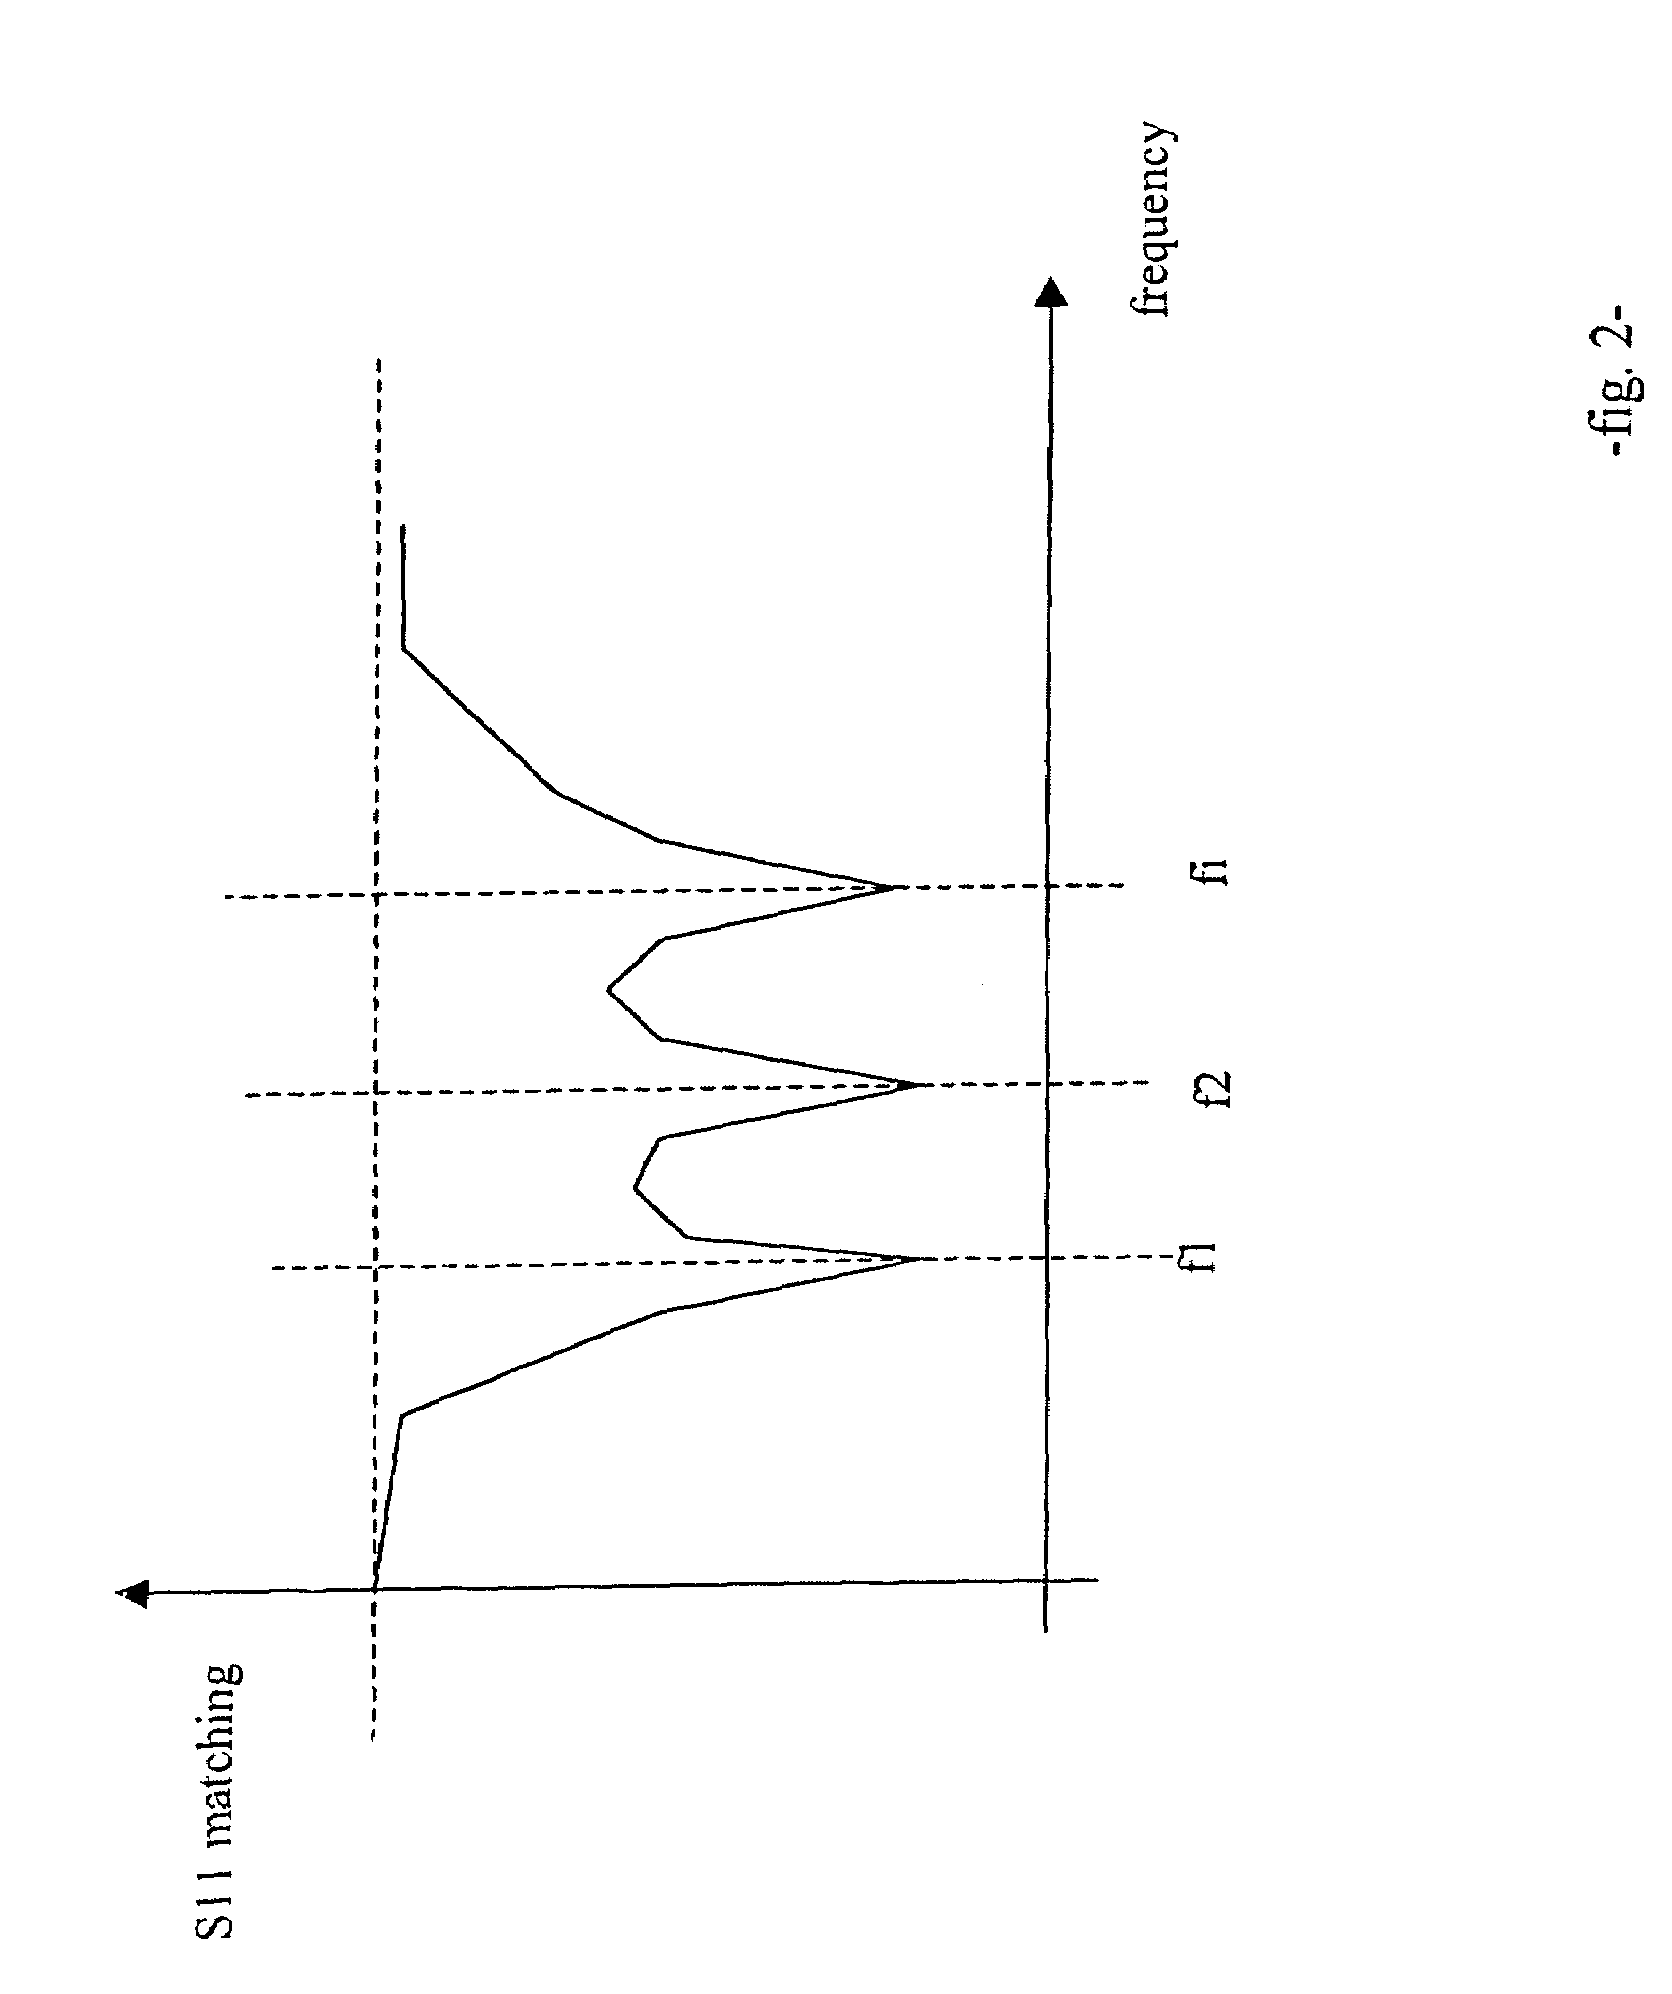 Multi frequency magnetic dipole antenna structures and method of reusing the volume of an antenna